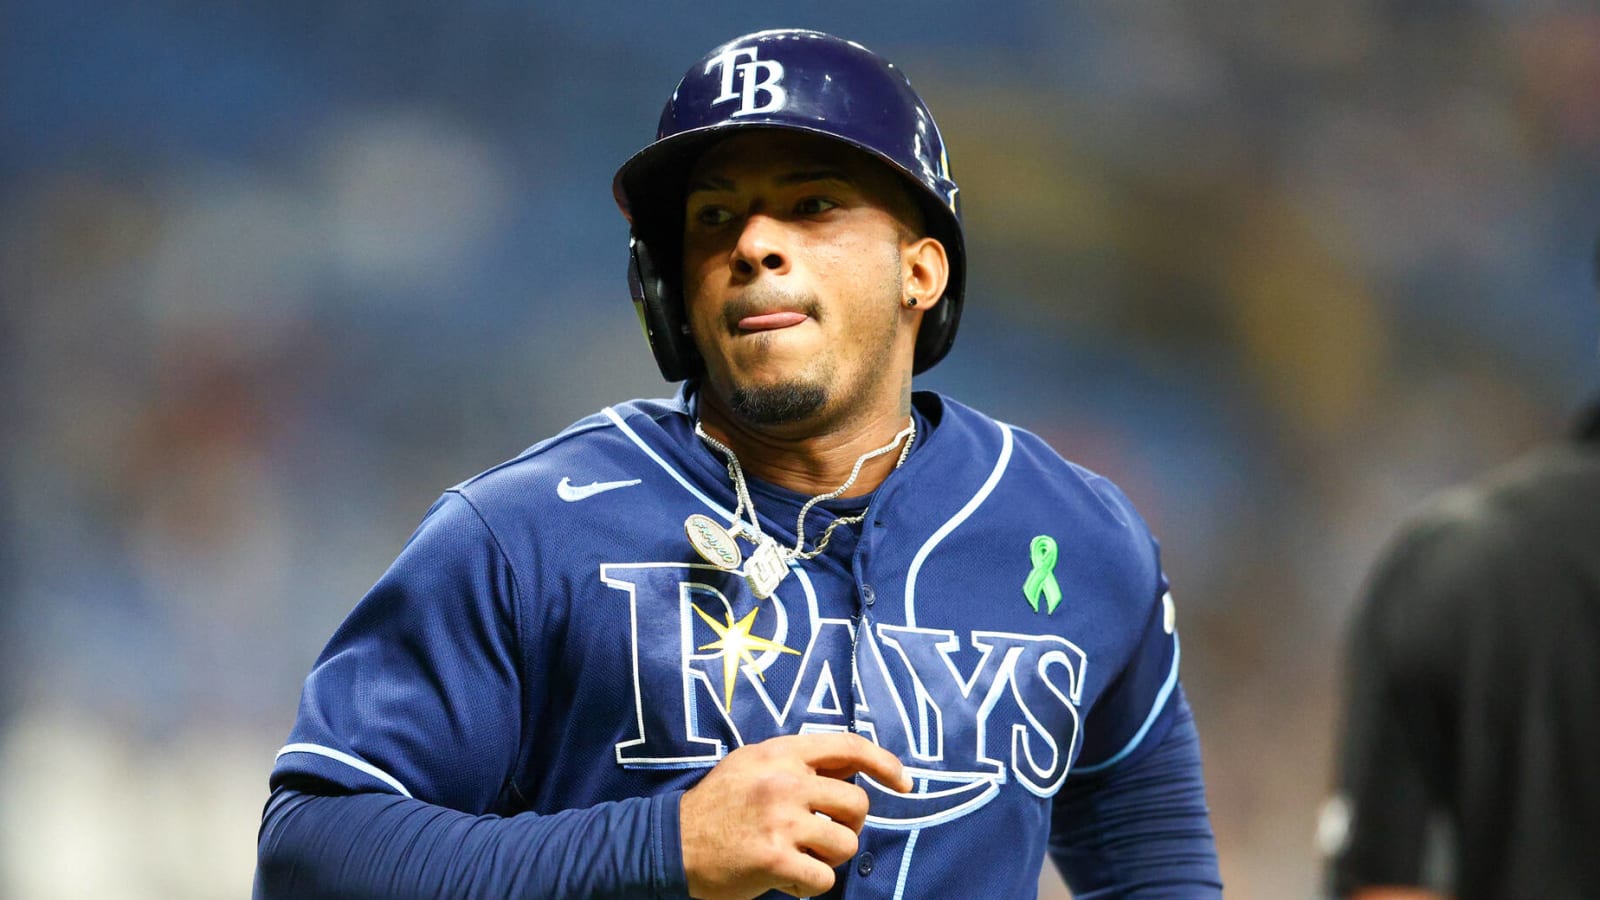 Rays place SS Wander Franco on IL with quadriceps strain